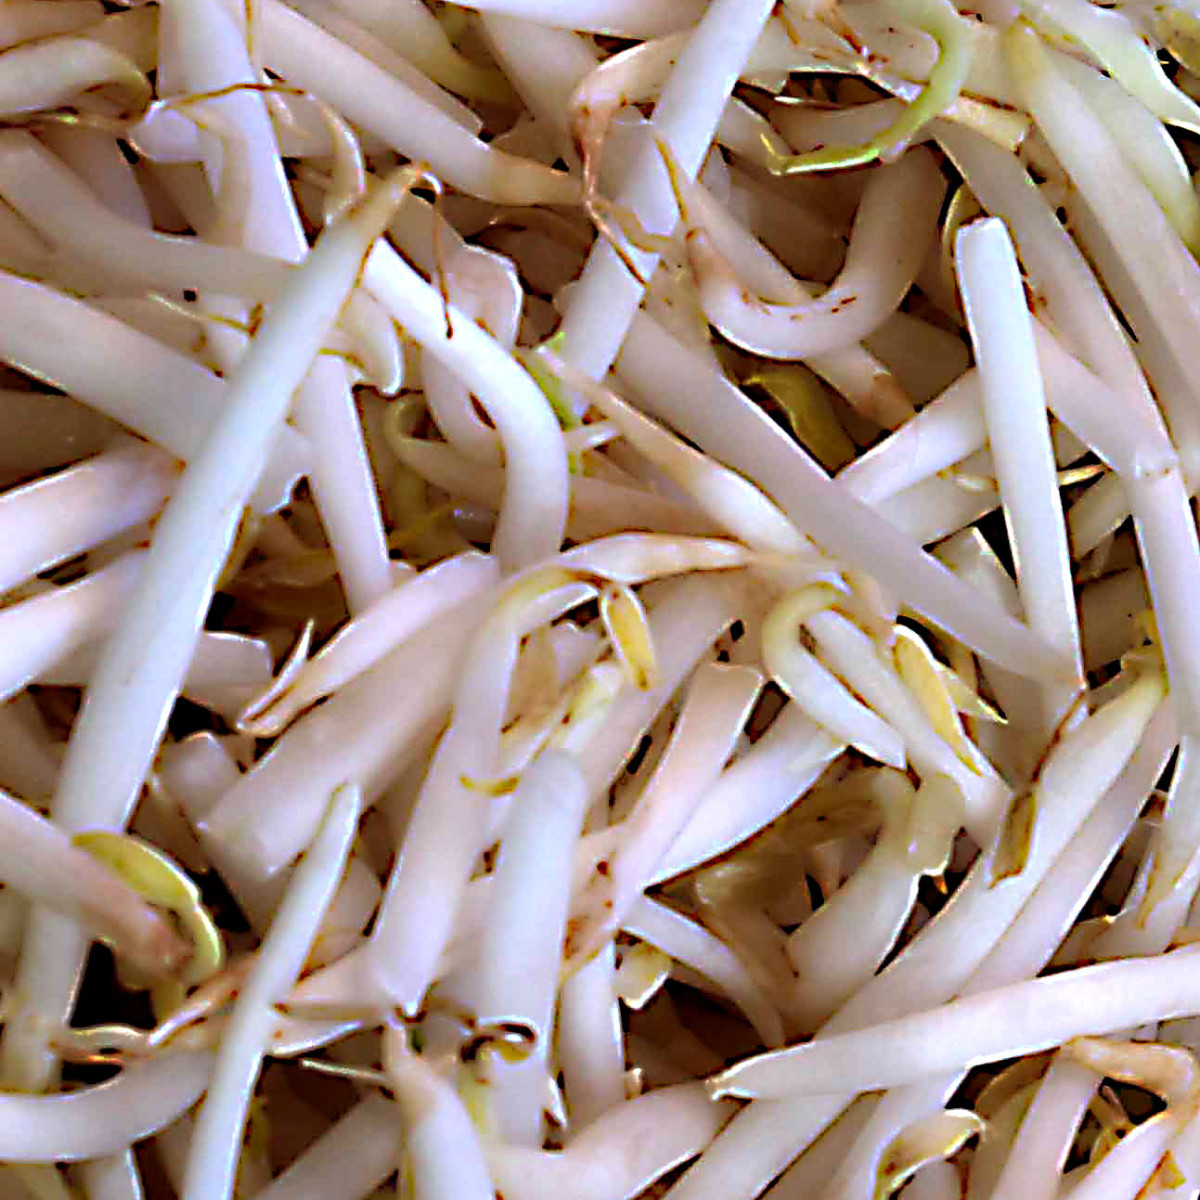 Bean sprouts - one of the staples of southeast Asian recipes